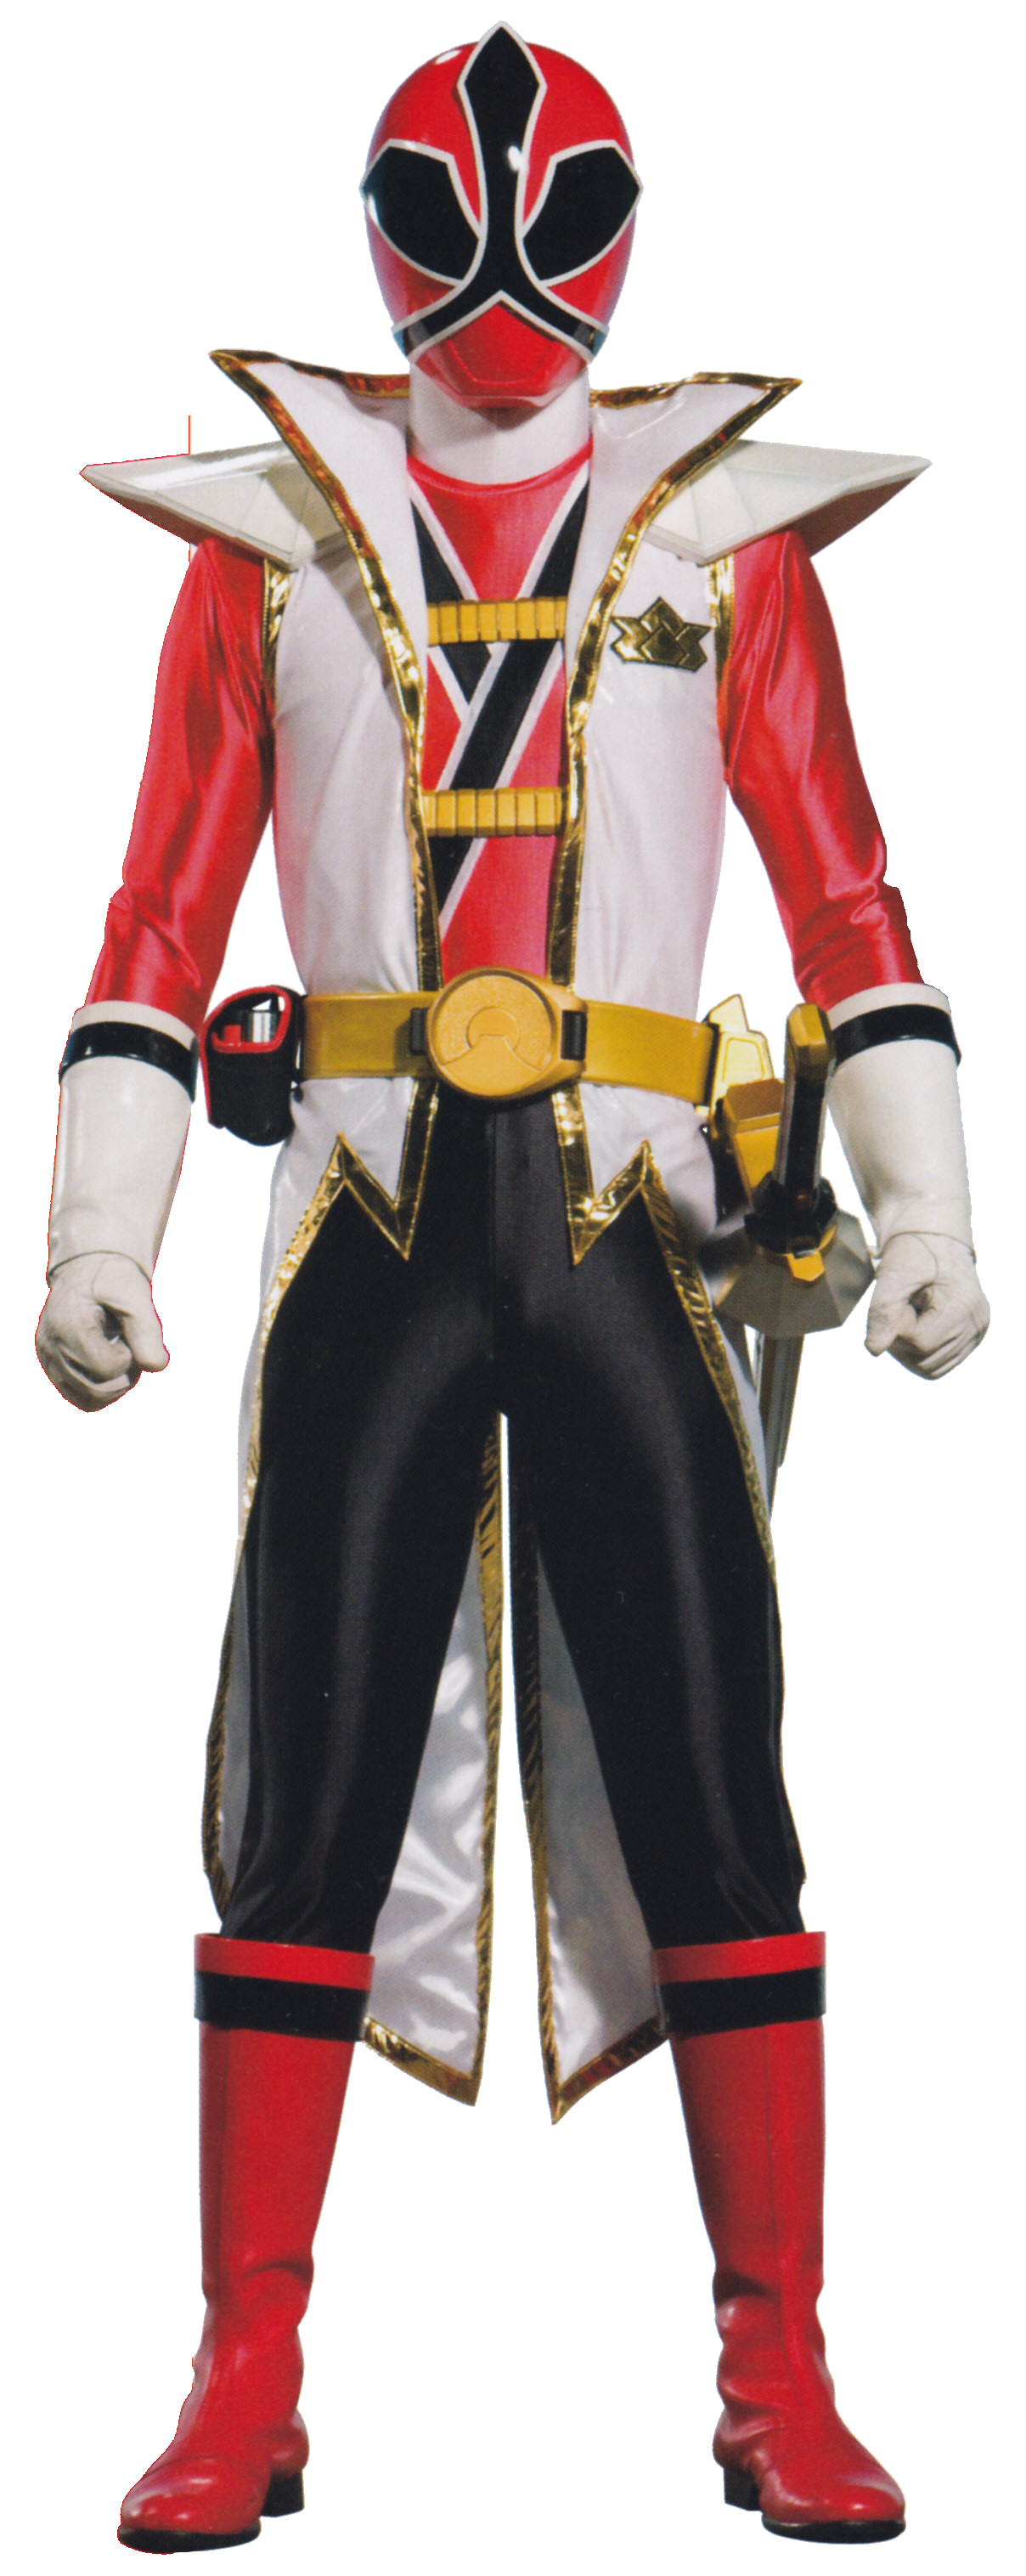 1208x3032 I searched for power rangers super samurai red ranger images on Bing and  found this from